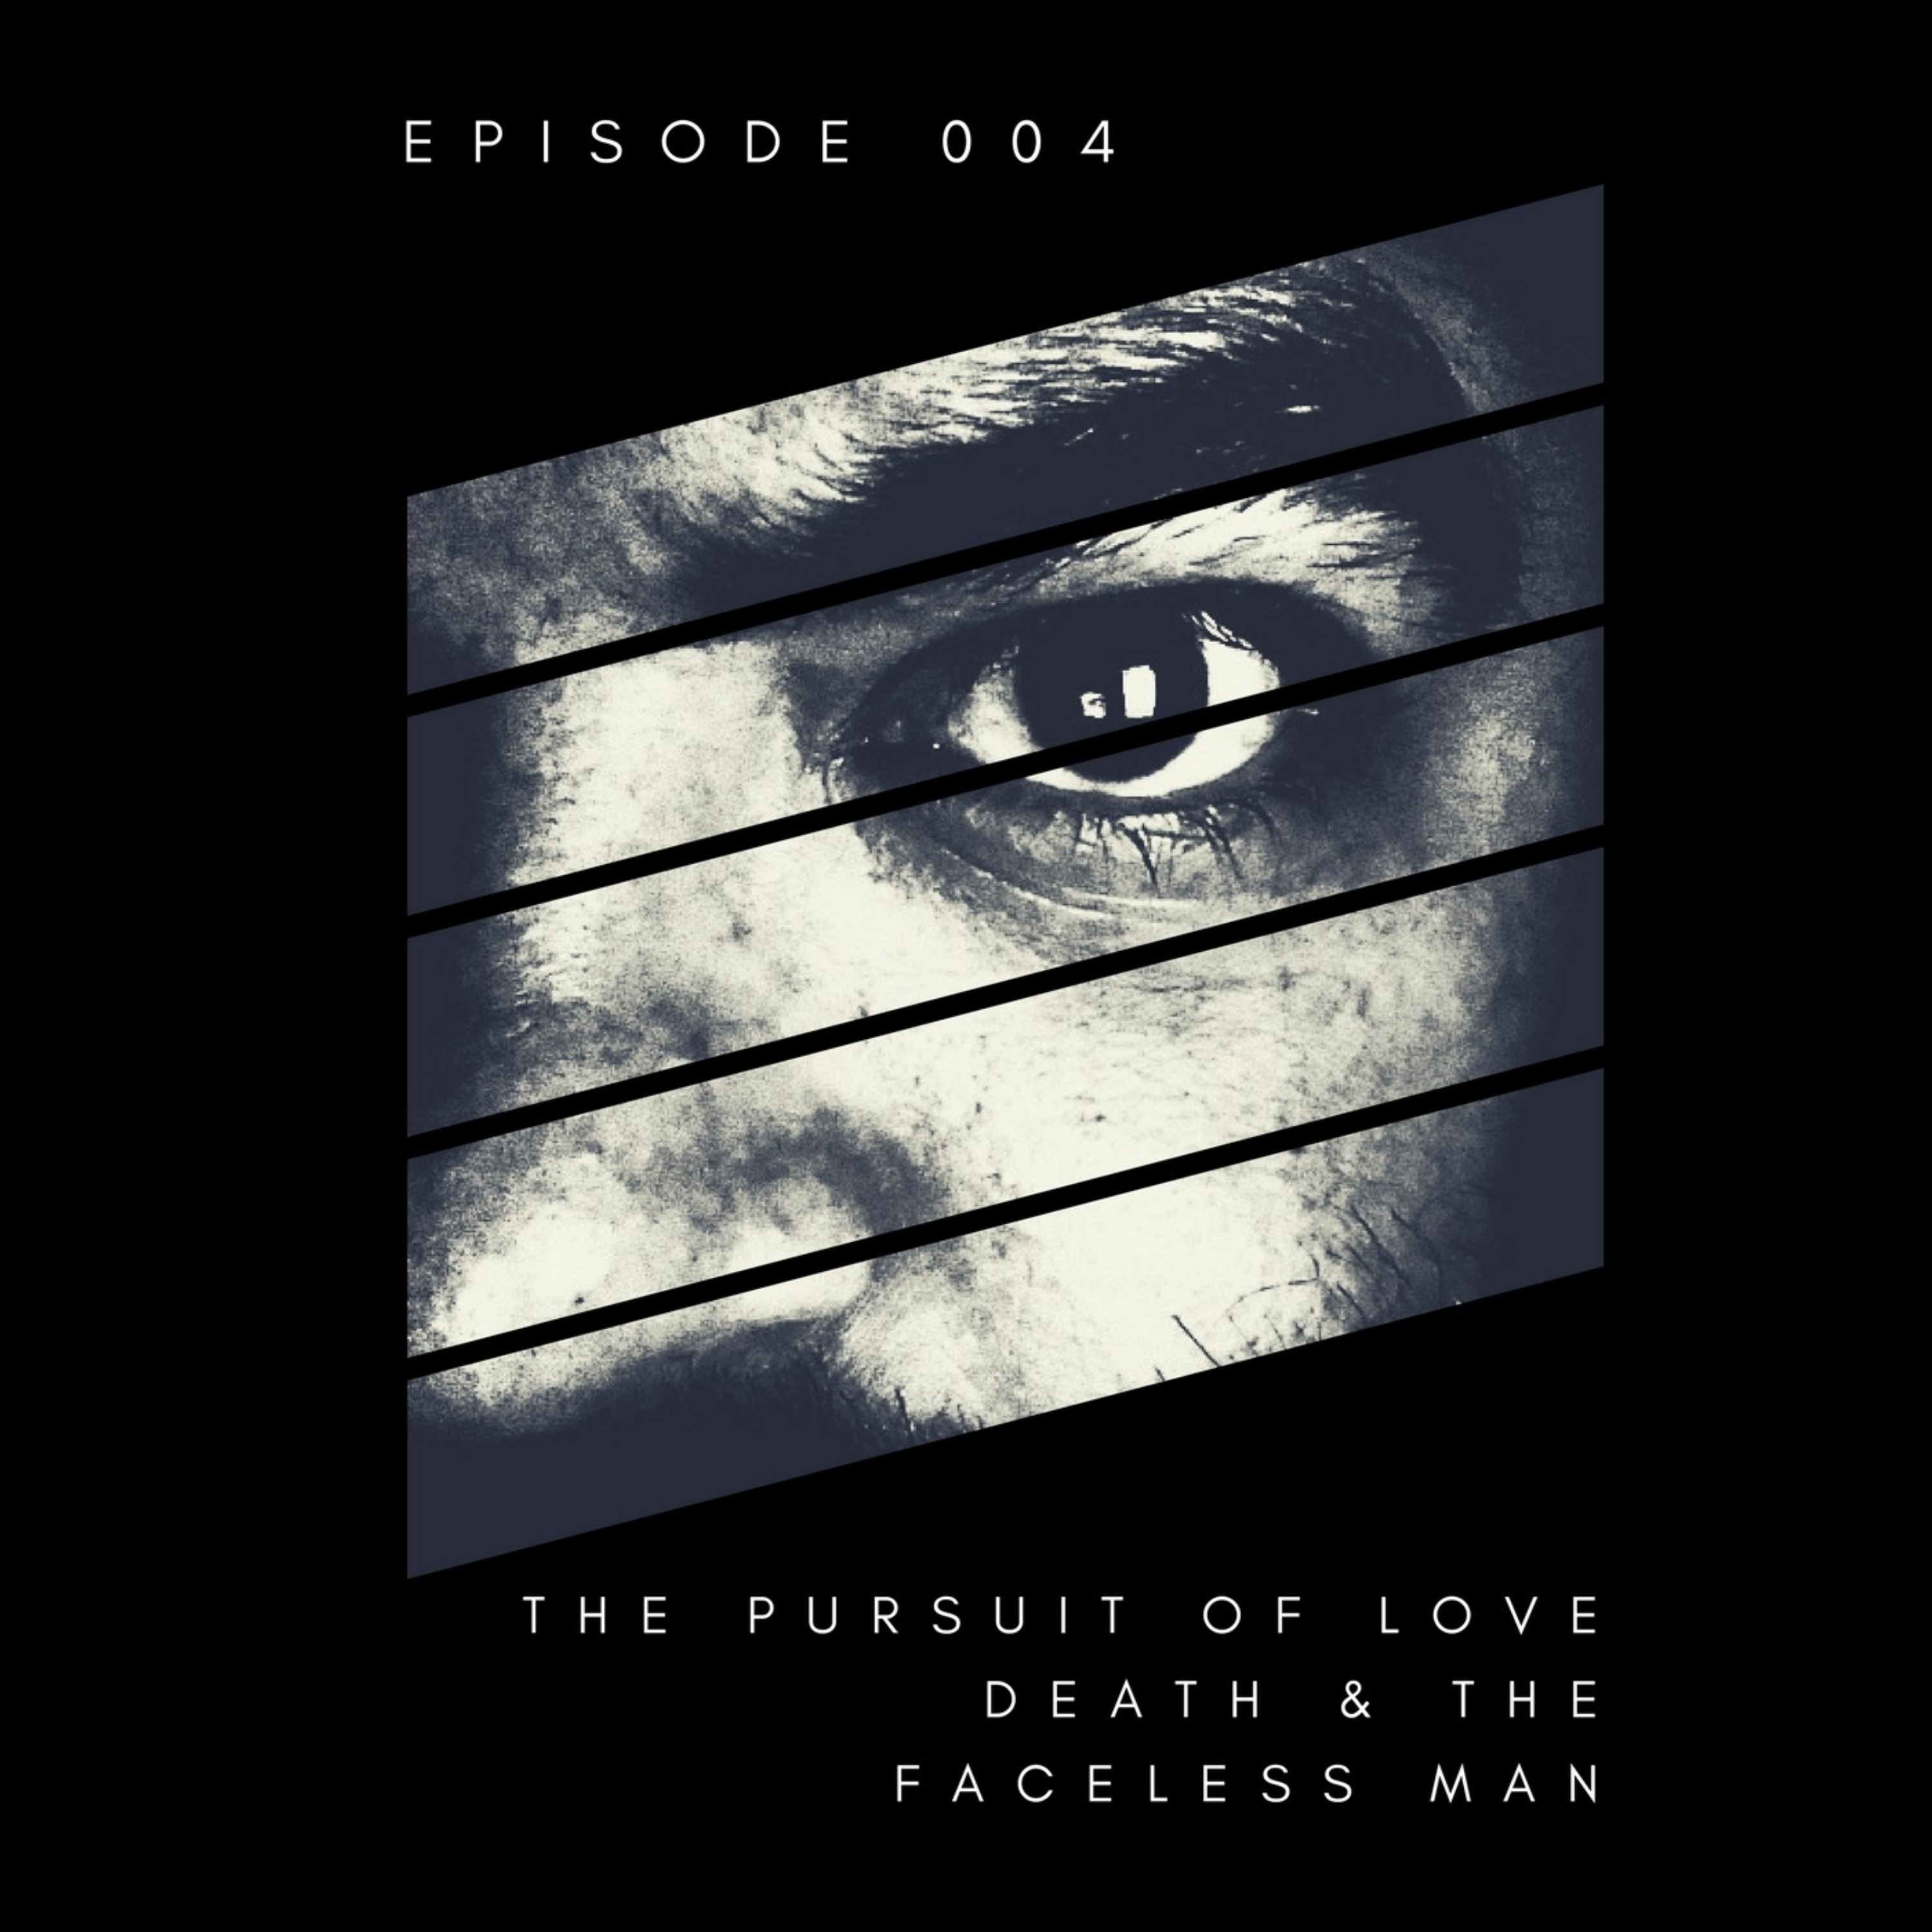 The Pursuit of Love, Death & The Faceless Man